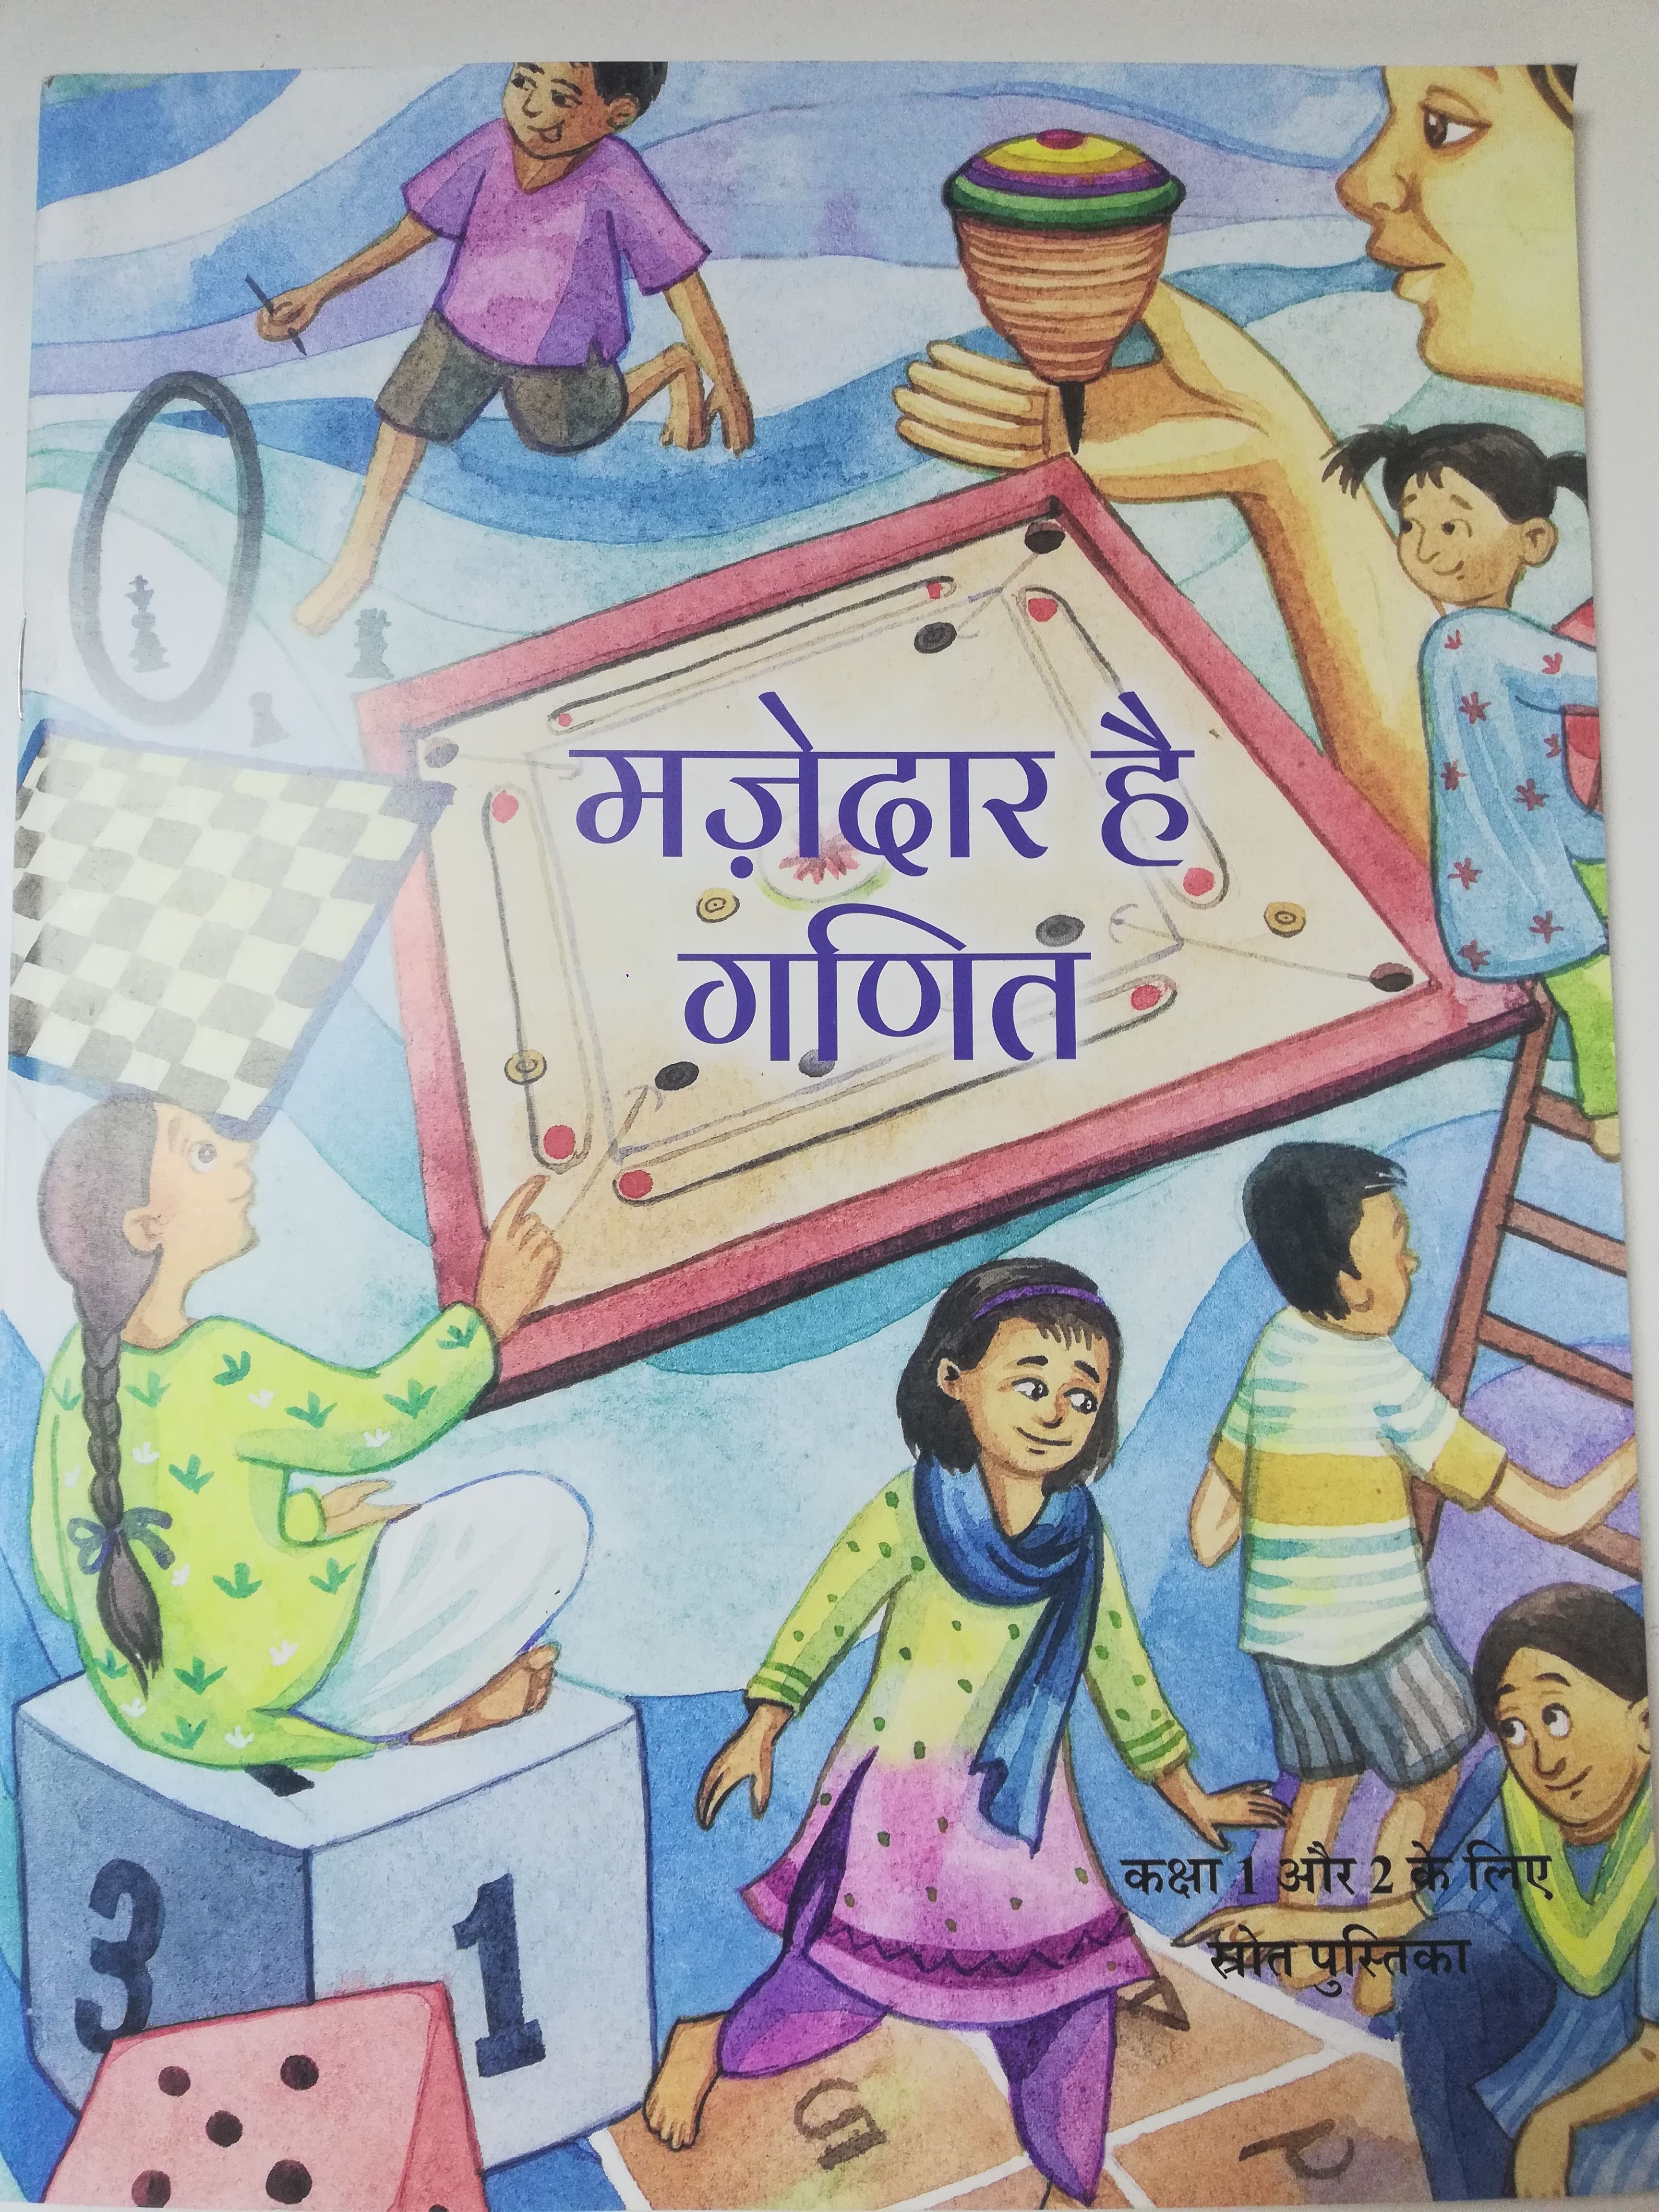 The new NCERT textbook that teaches maths through poems, activities, riddles and games. | Photo: ThePrint